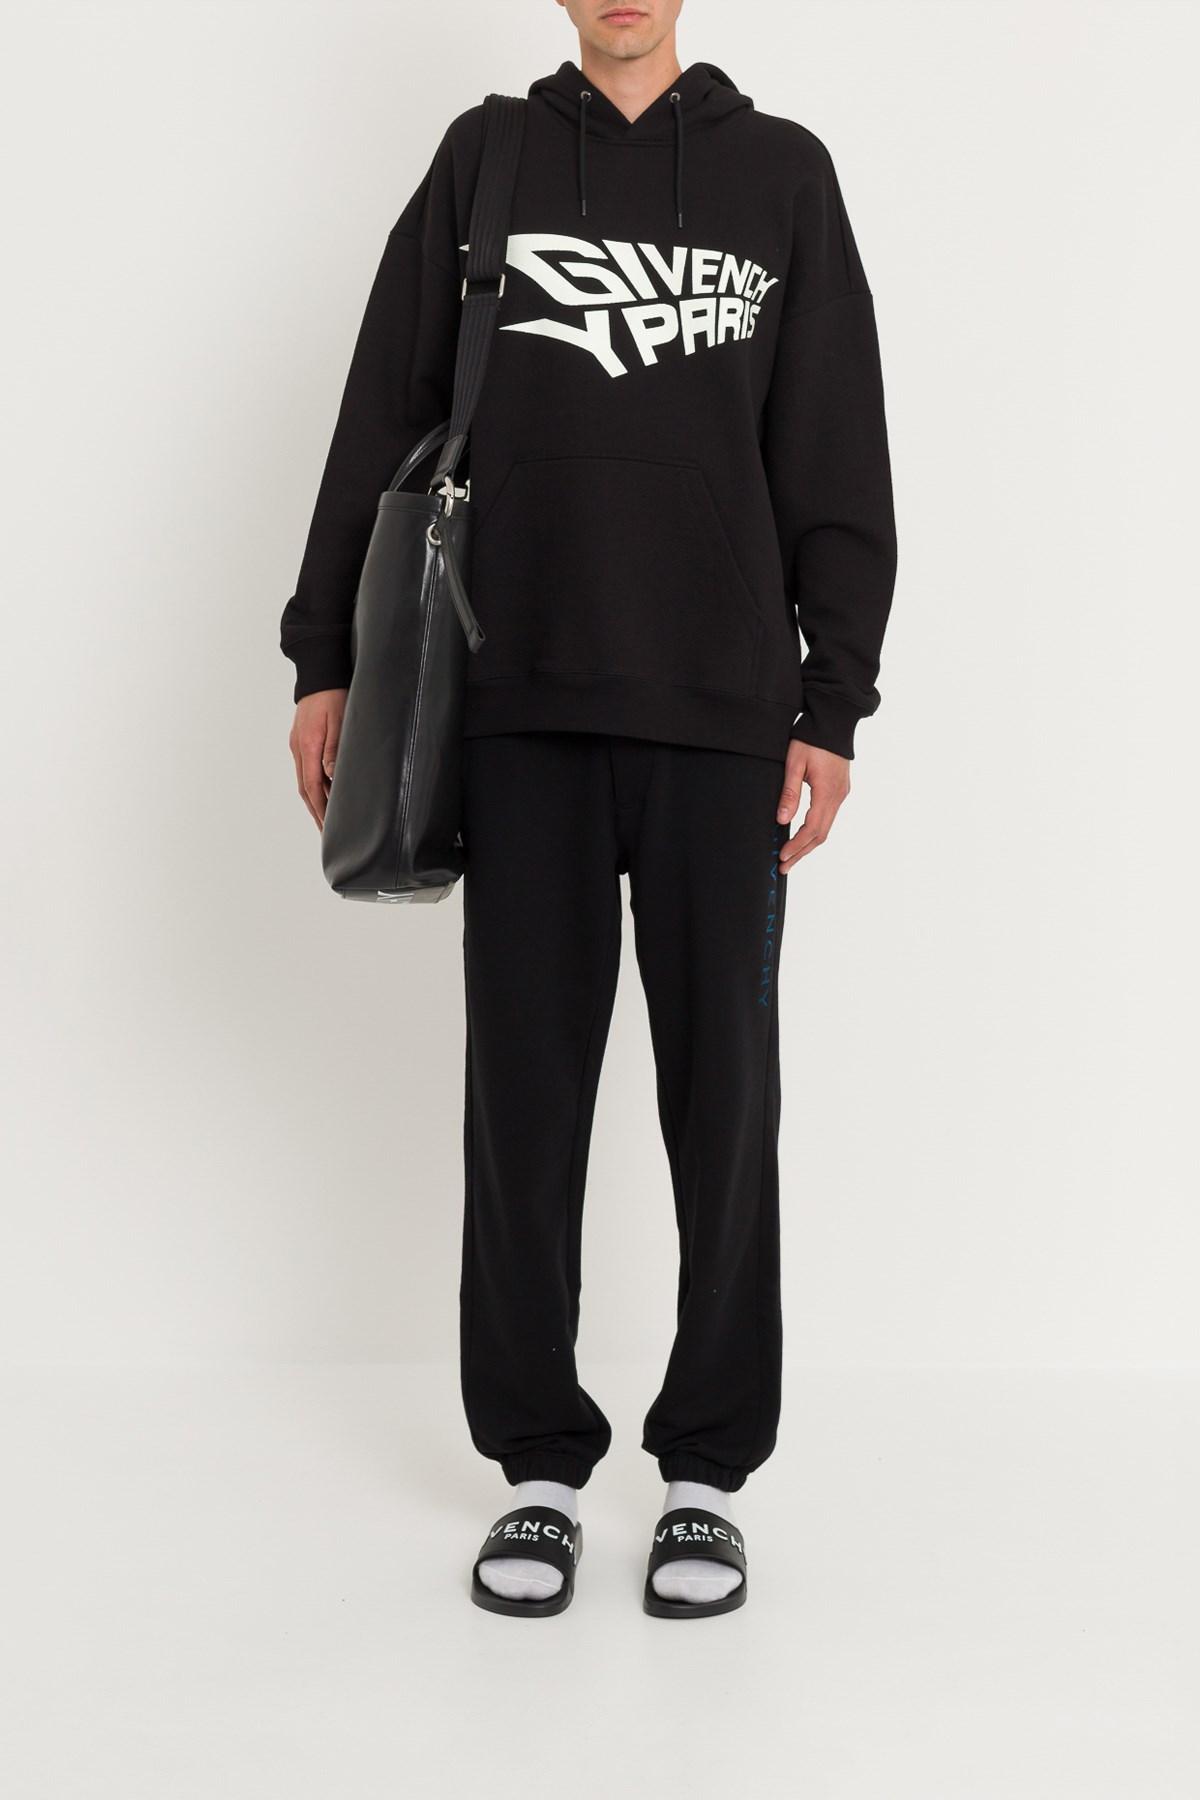 Givenchy Paris Luminescent Hoodie in Black for Men | Lyst